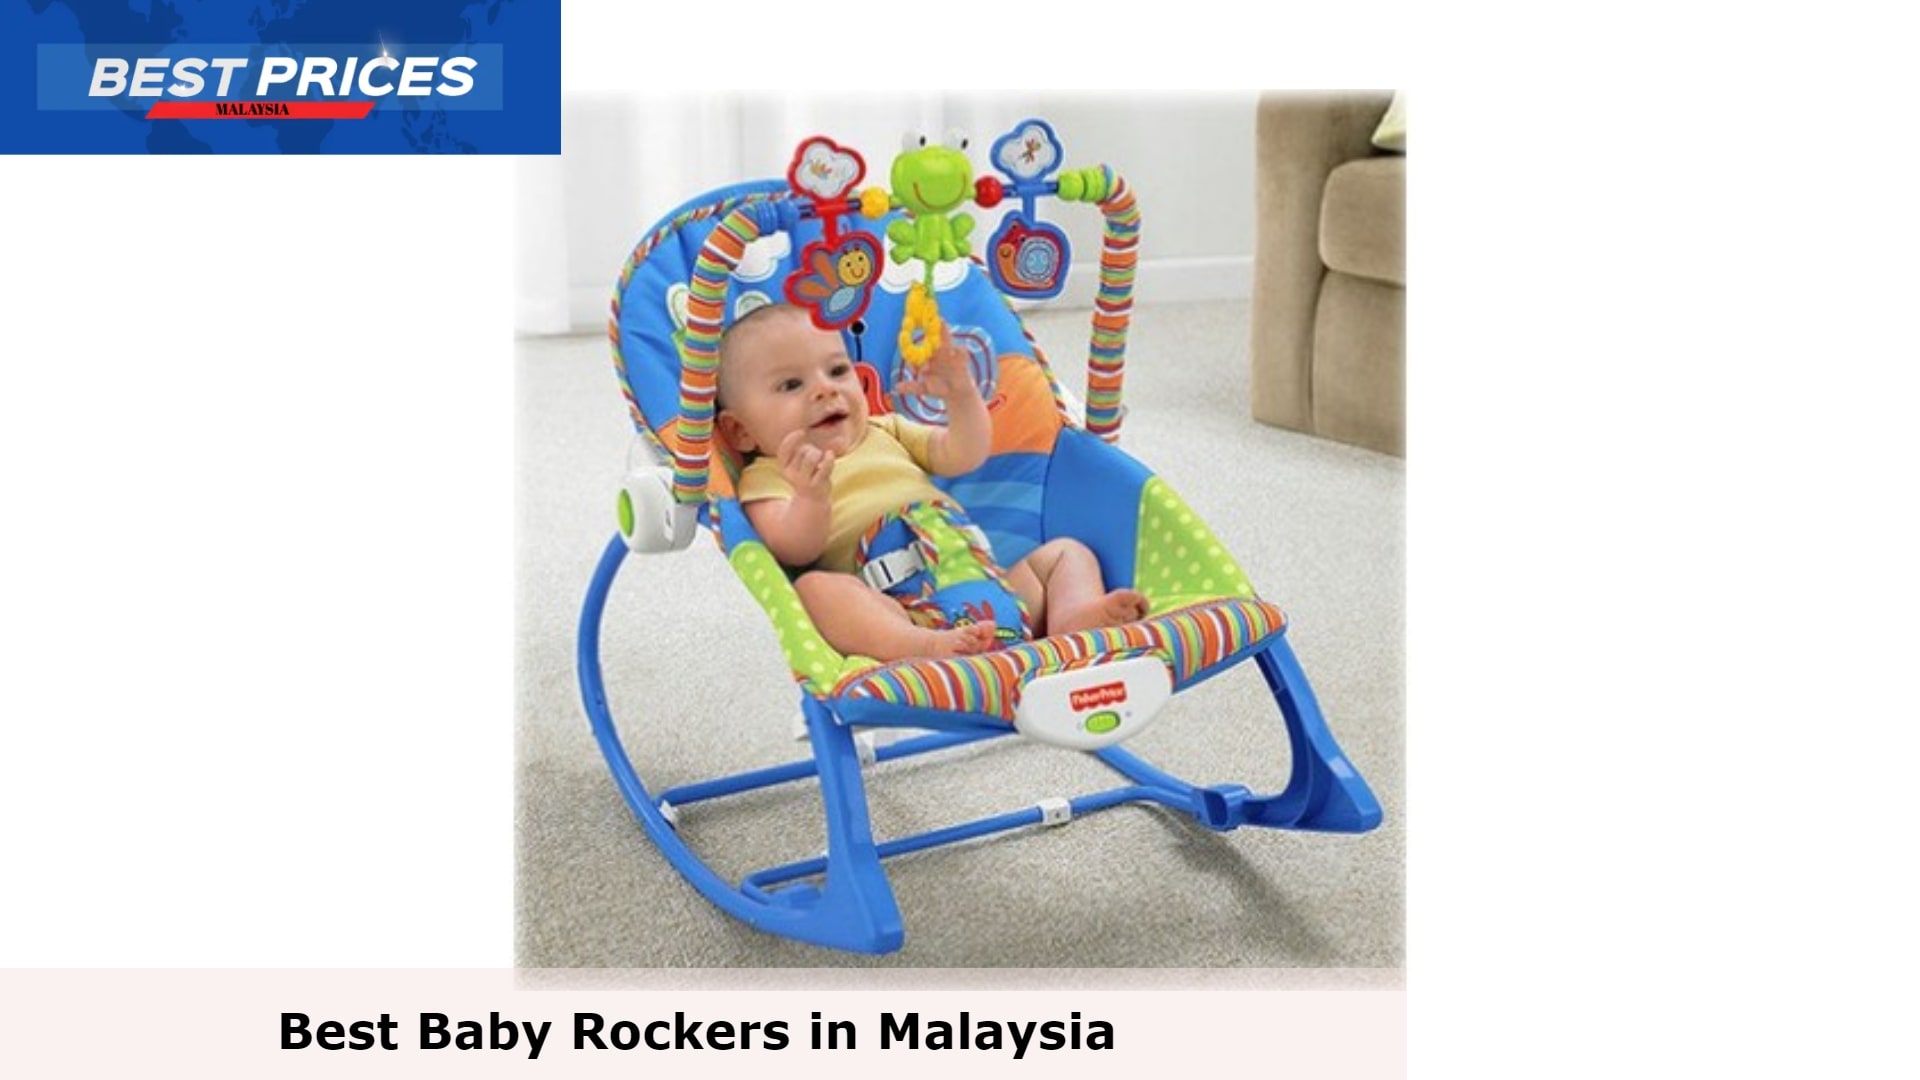 iBaby Infant-to-toddler Rocker - Baby Rocker Malaysia, Are rockers OK for babies?, What age are baby rockers Good For?, Is rocker vibration good for baby?, Are rocking beds good for babies?, Can a baby sleep in a rocking crib?, Why does rocking calm babies?, Which baby bouncer is best?, Baby Bouncers Malaysia, baby rocker fisher-price, baby bouncer net, baby bouncer mothercare, baby bouncer chicco, baby bouncer nuna, baby bjorn bouncer, baby swing cradle, baby rocking bed,